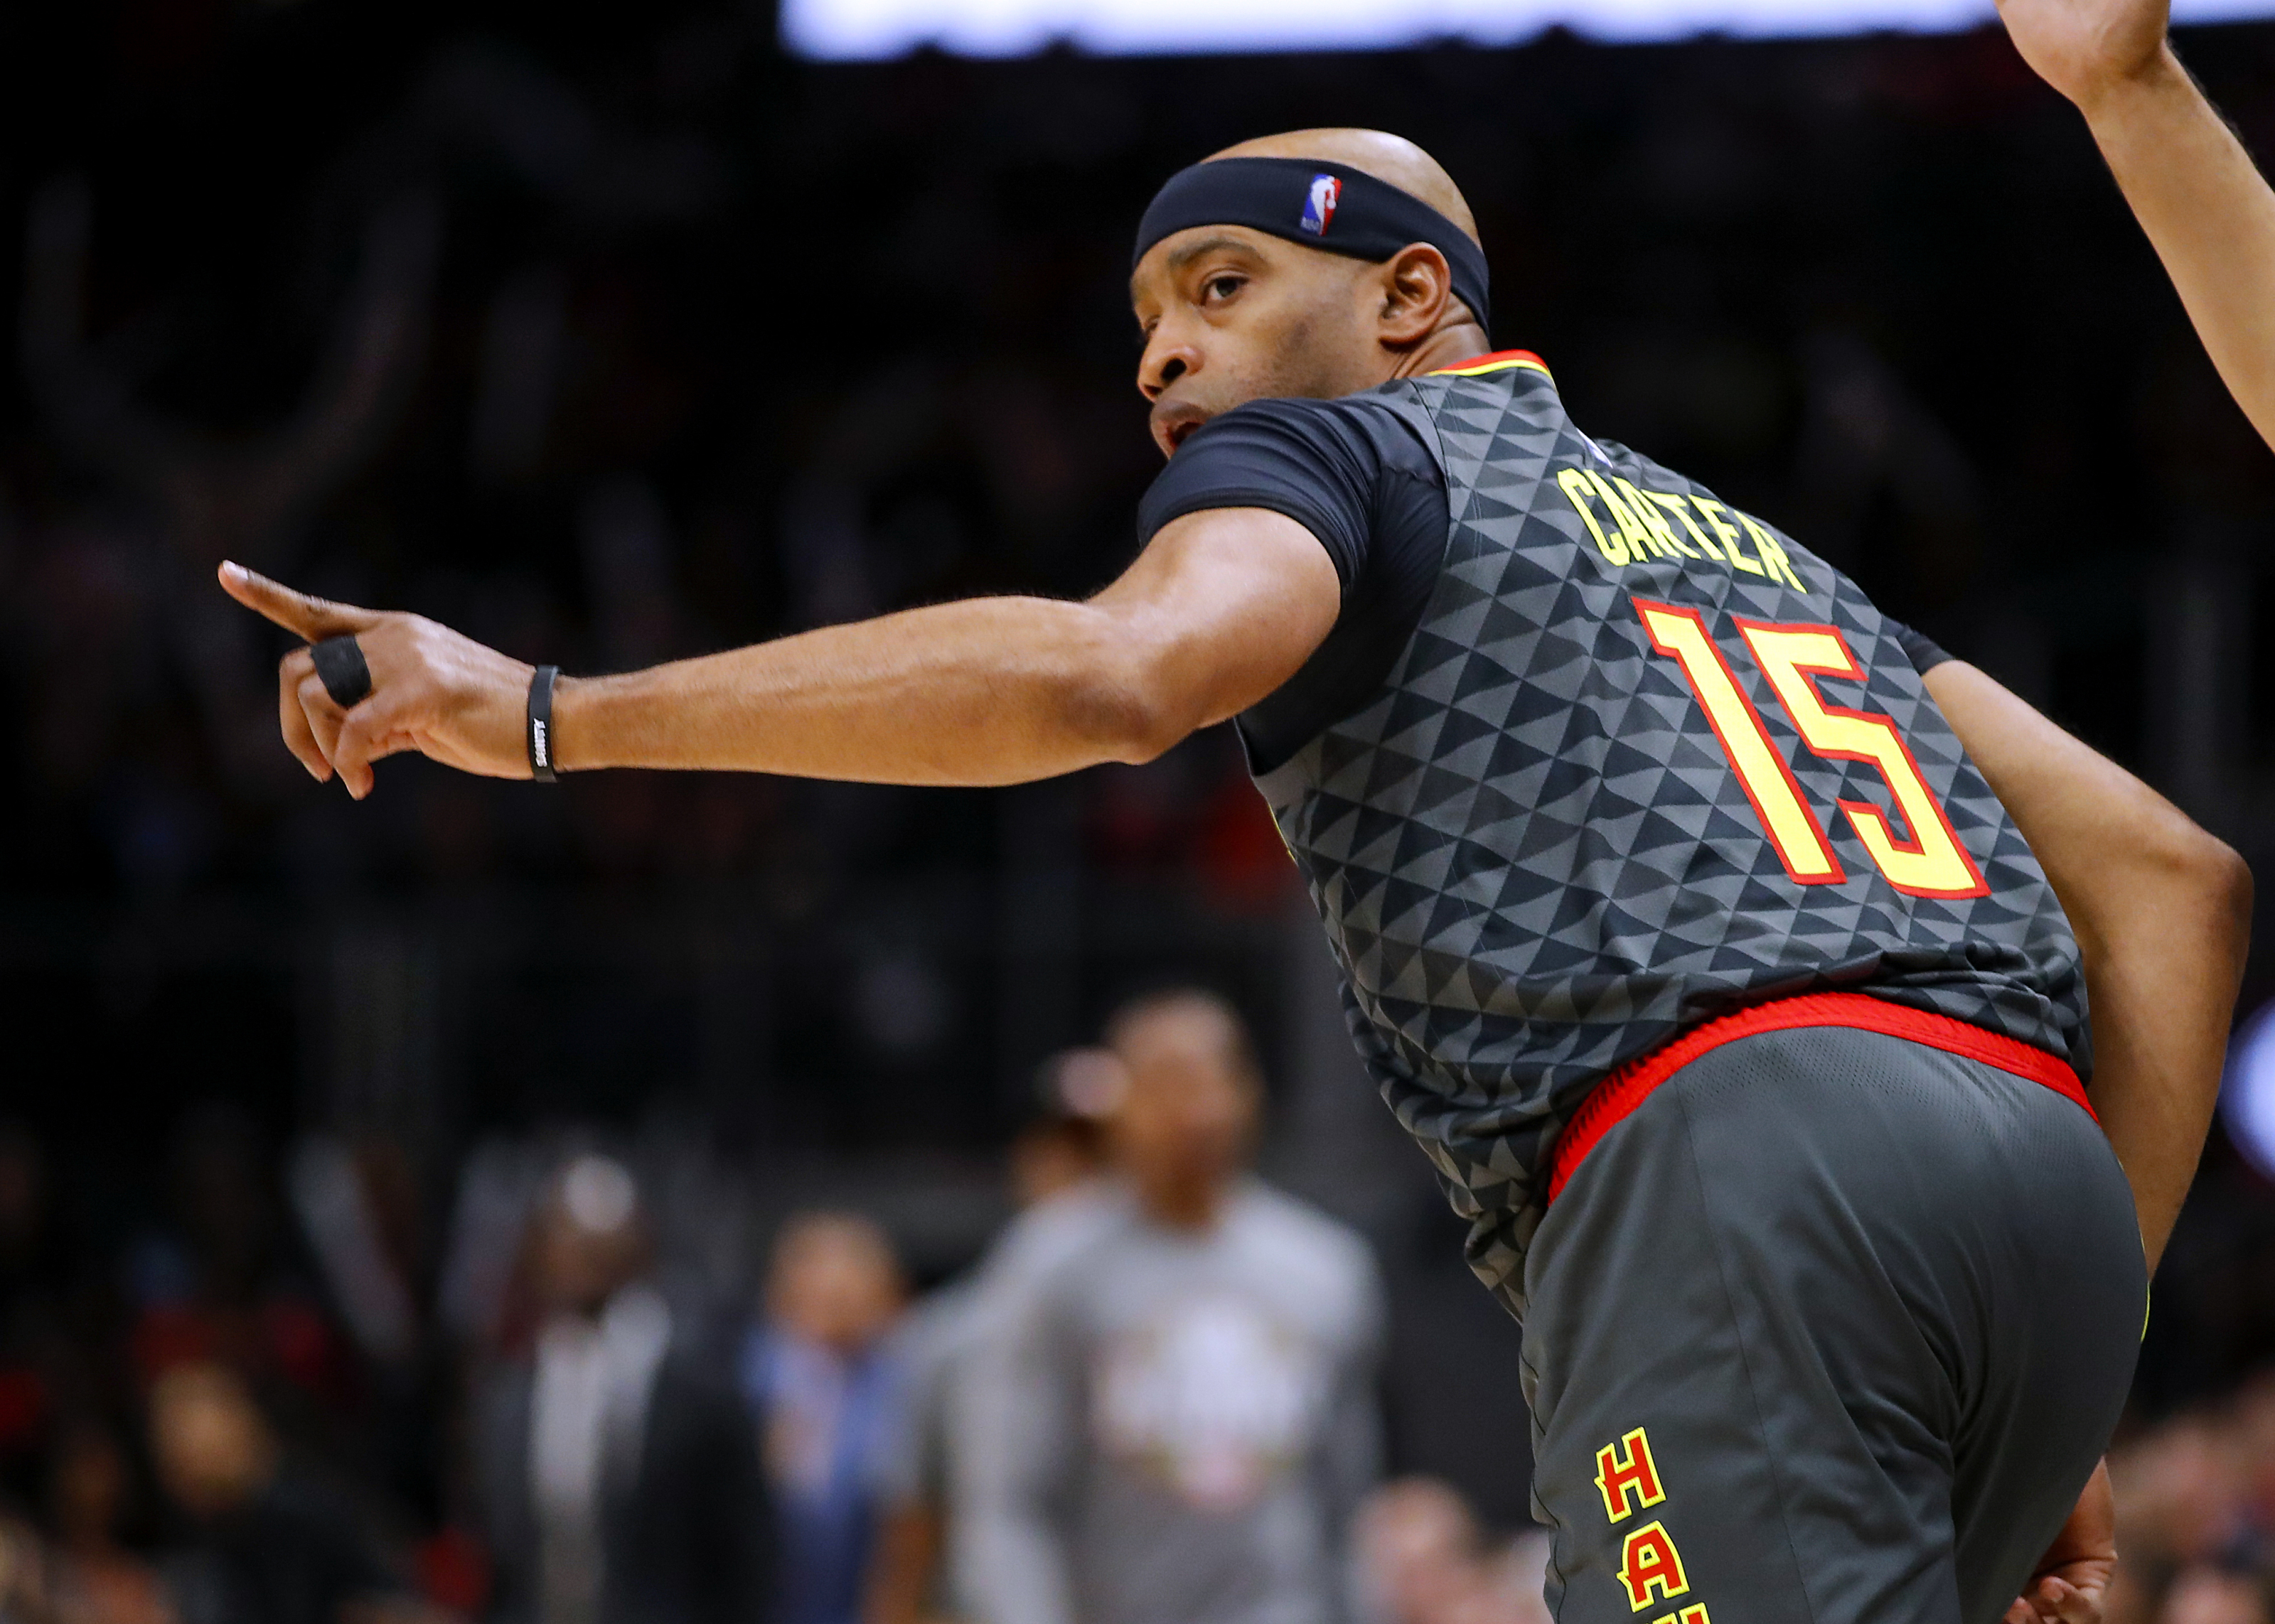 Vince Carter is retiring from the NBA after 22 seasons